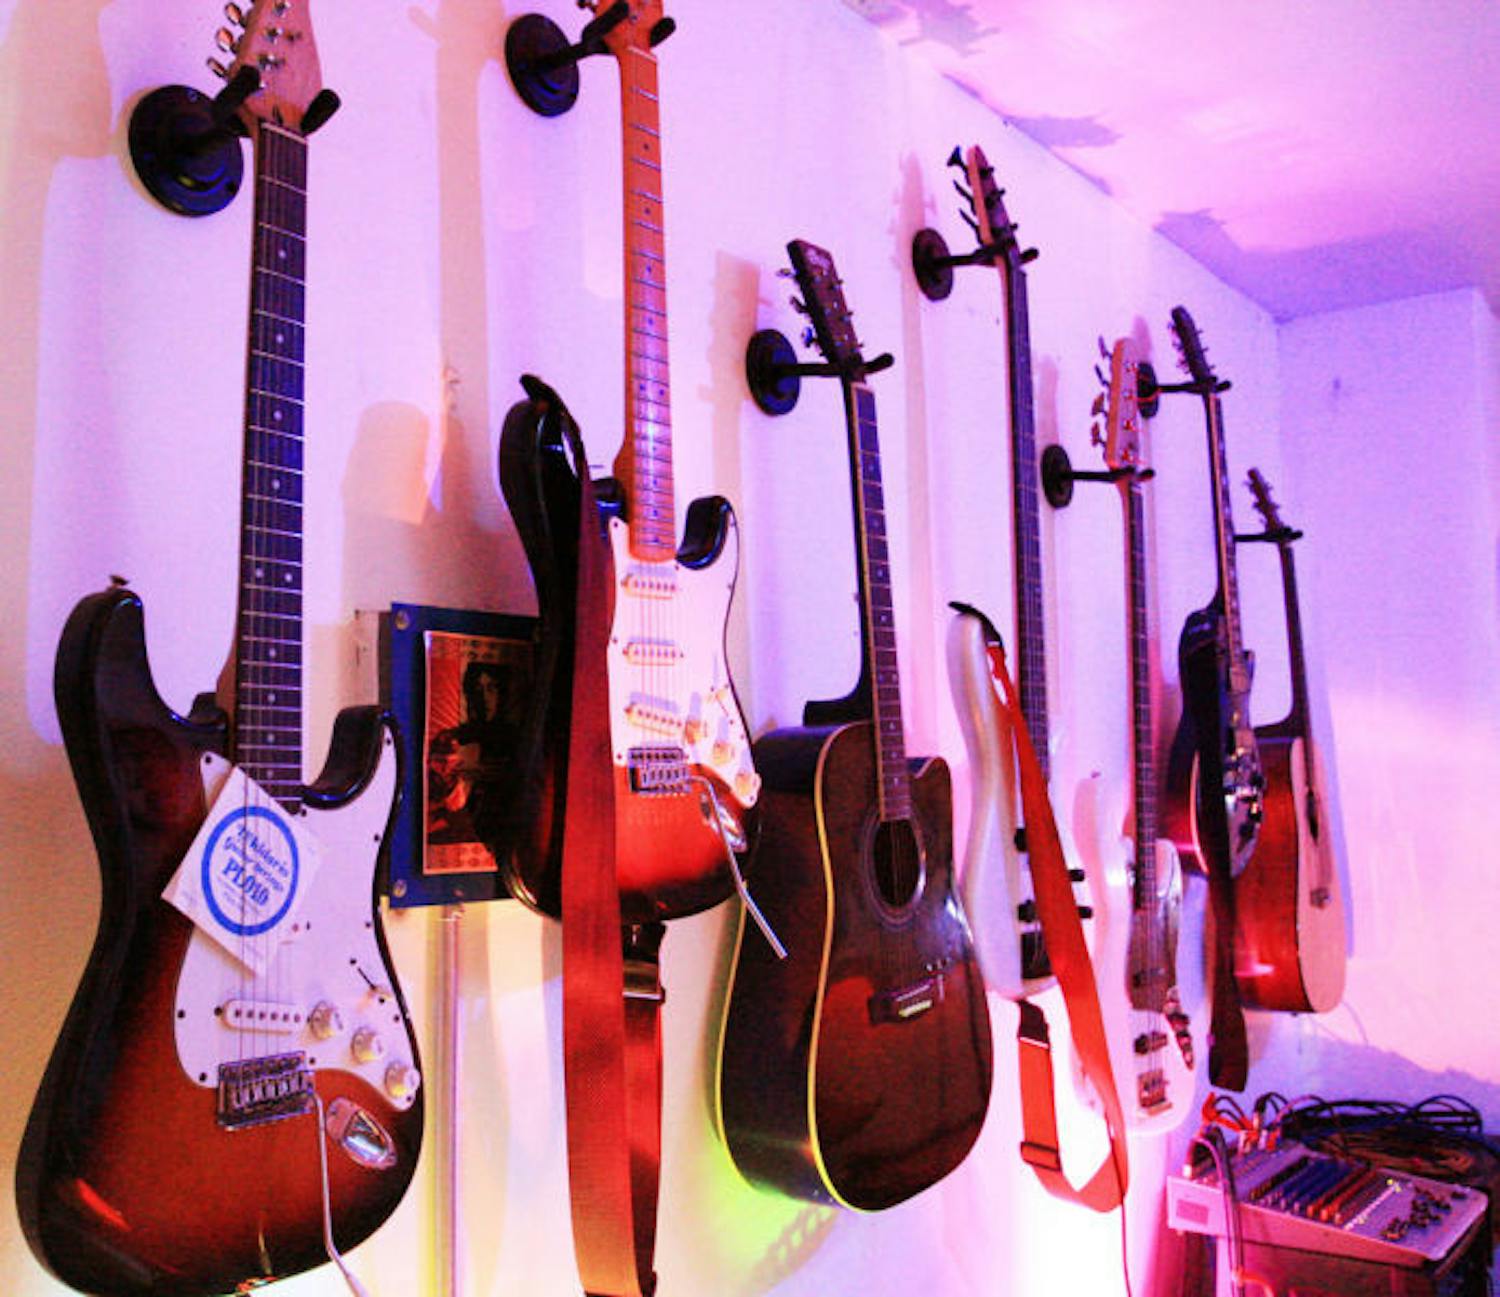 Guitars hang on the wall of The JAM, 817 W. University Ave., waiting to be played by patrons. Anyone can use the bar’s instruments, which include guitars, drums and a piano, to rock on the stage.